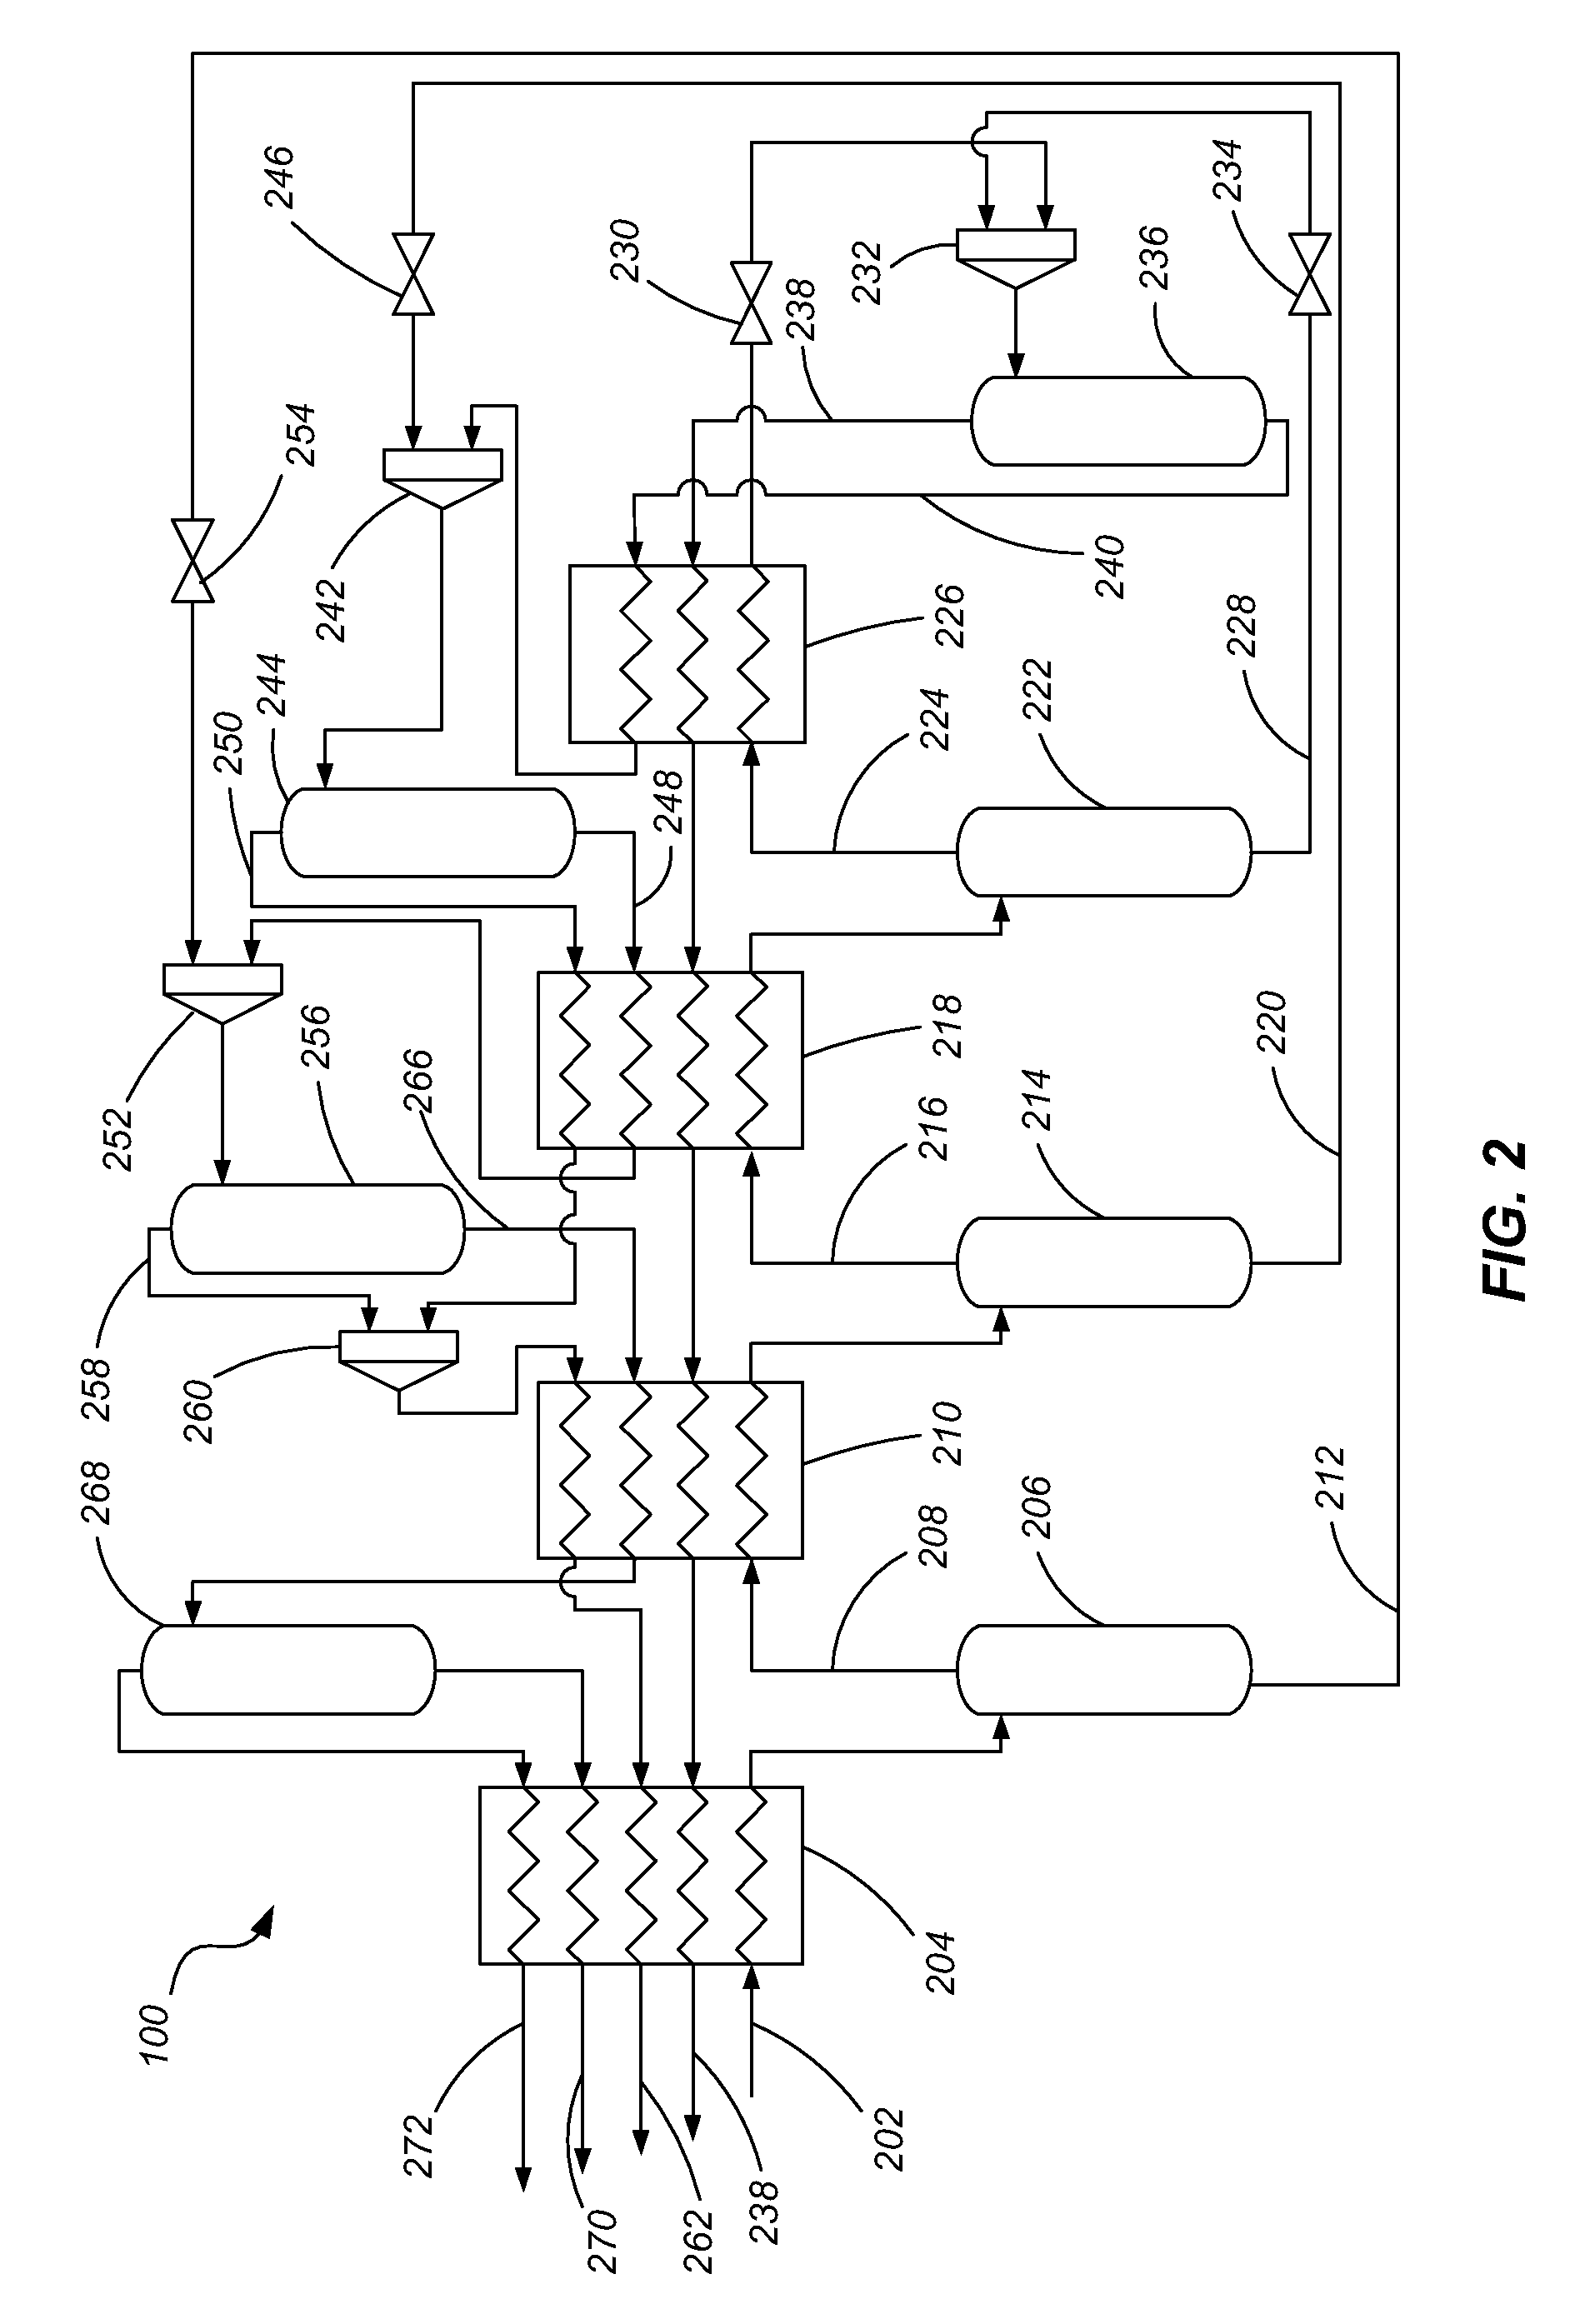 Methods, apparatuses and systems for processing fluid streams having multiple constituents